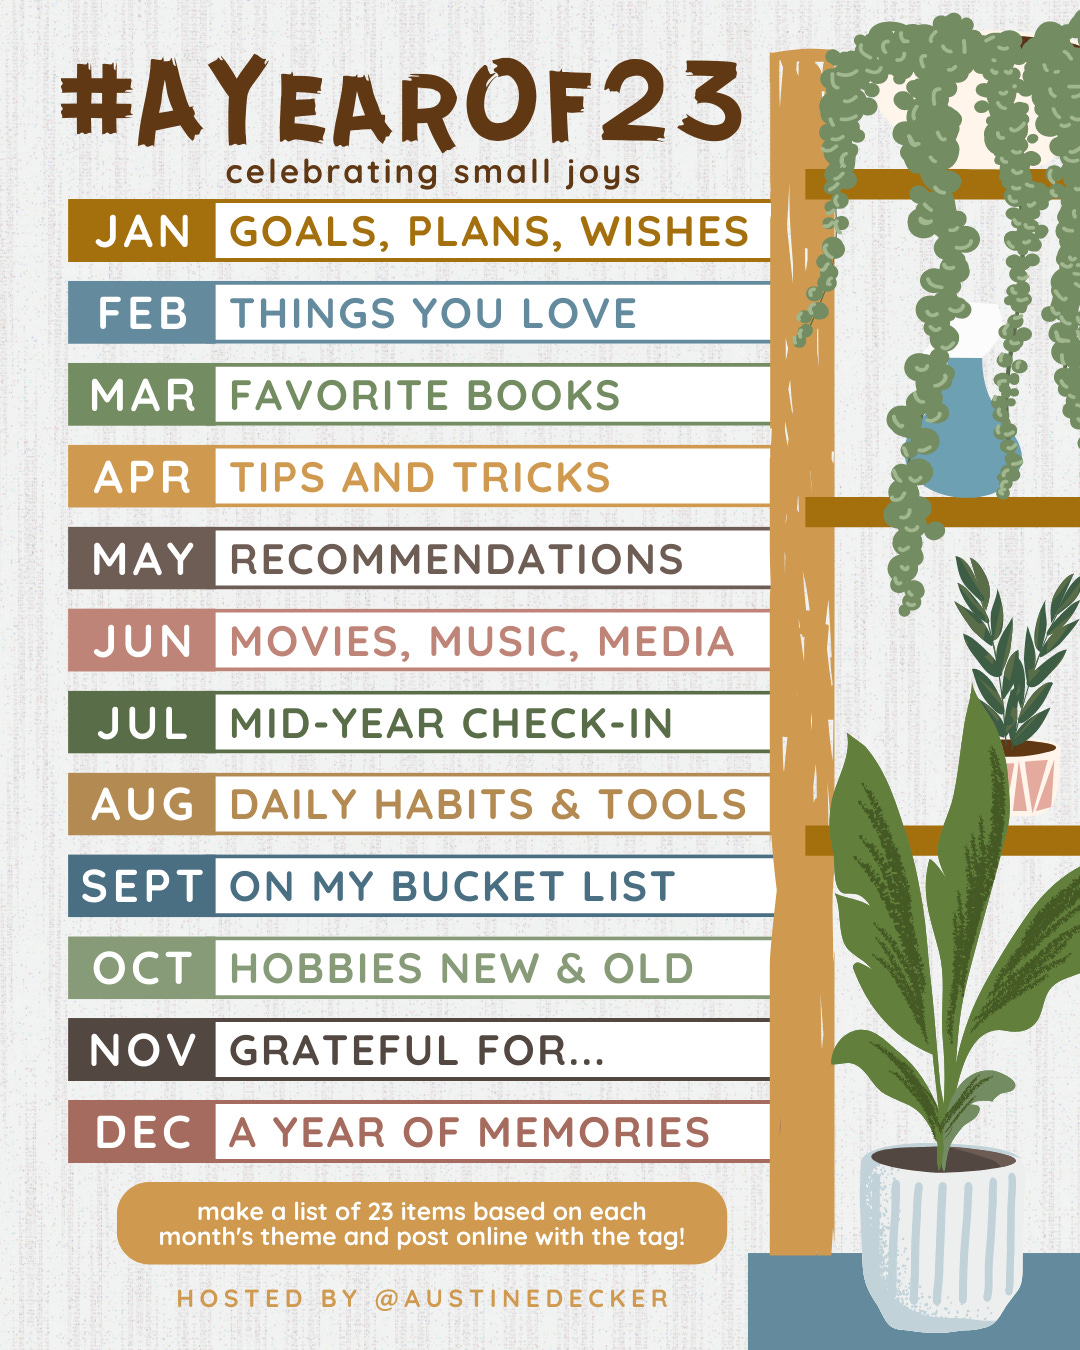 A graphic showing a ladder with plants on the right side. The title reads #AYearOf23 - celebrating small joys. Beneath it are prompts for each month (listed in the newsletter). The directions state to make a list of 23 items based on each month's theme and post online with the tag.